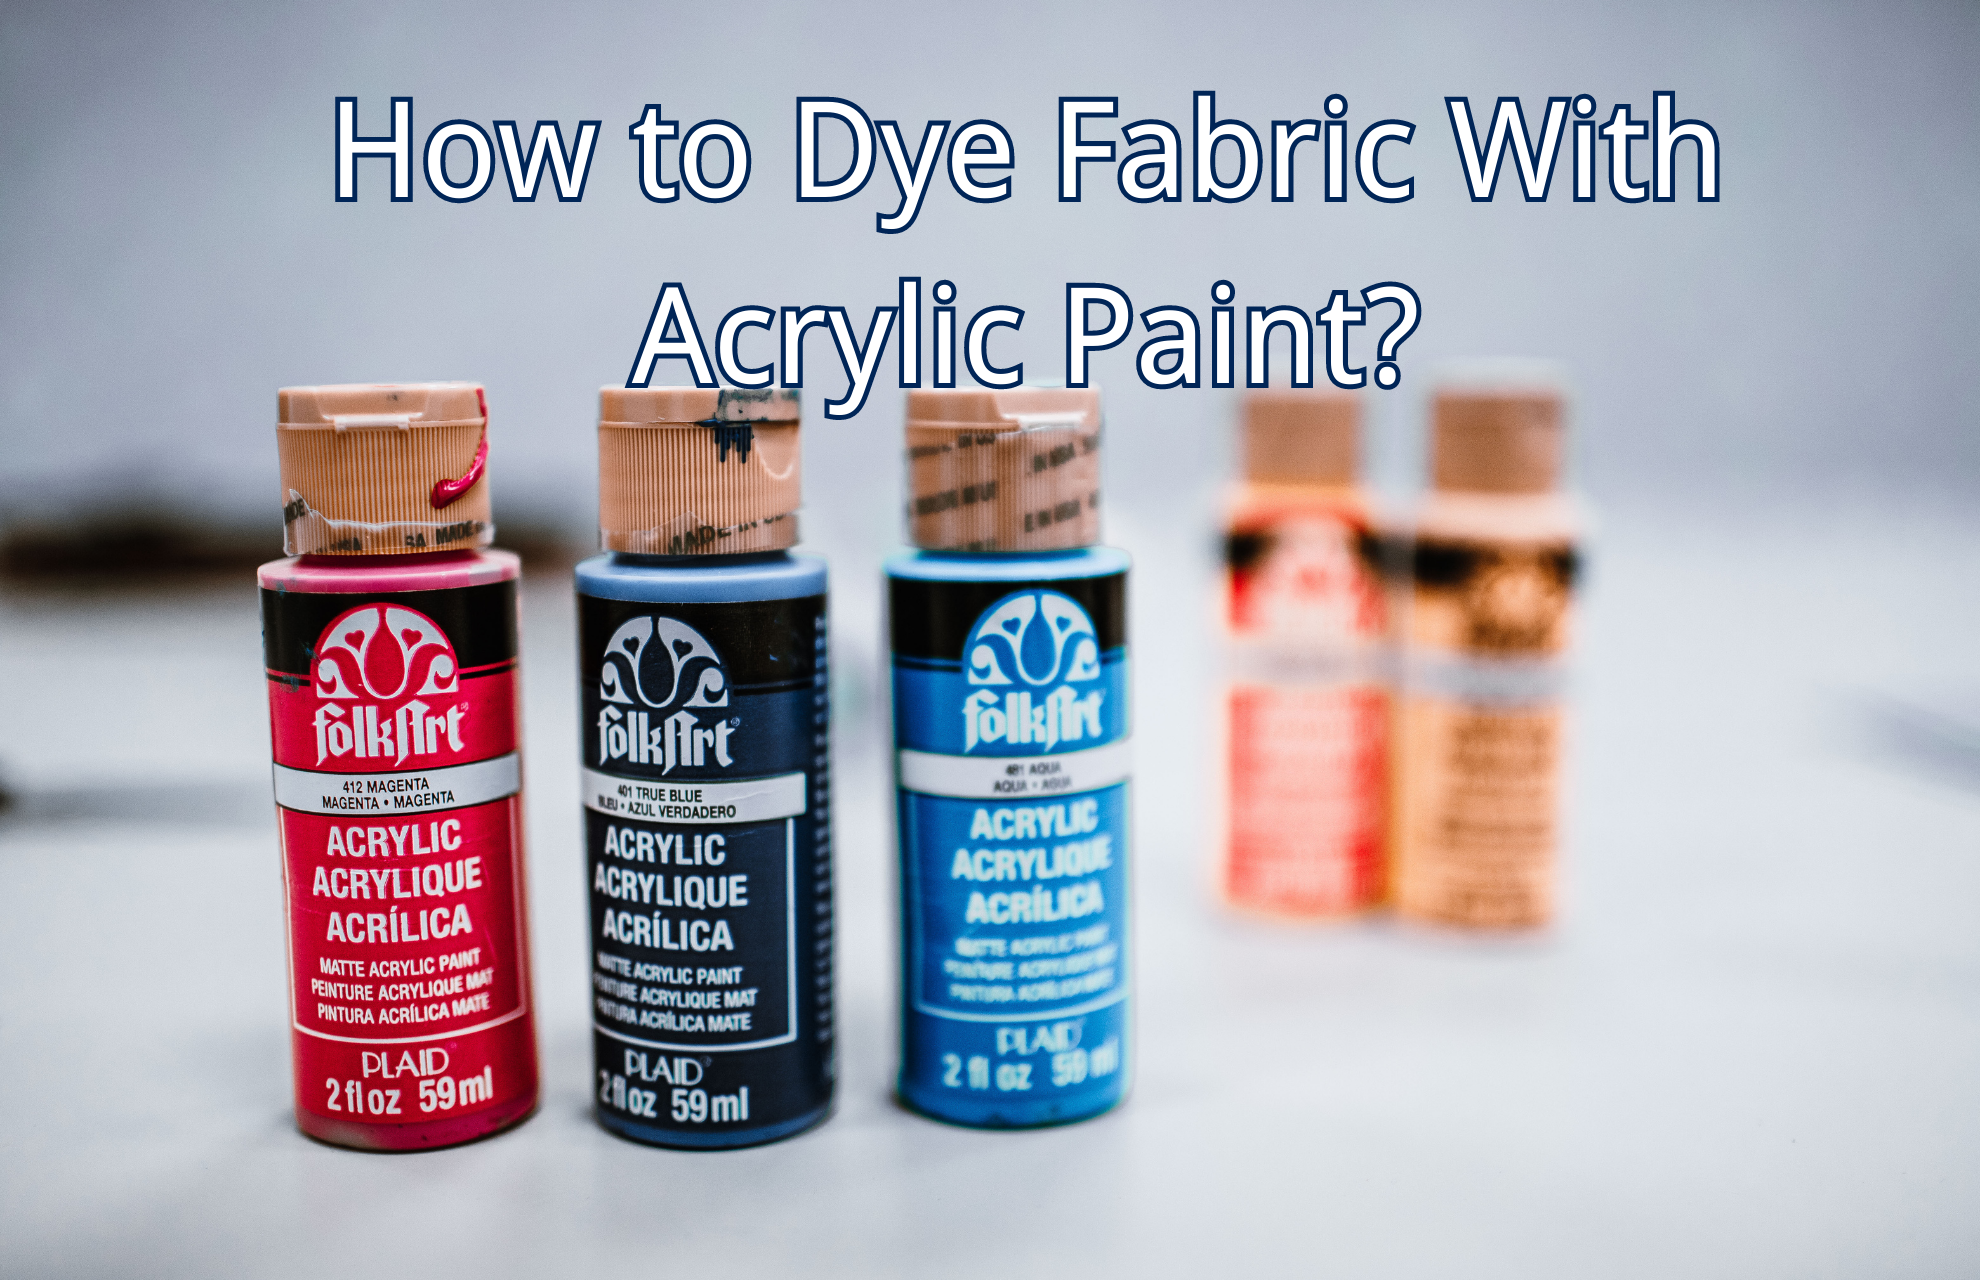 How to Dye Fabric With Acrylic Paint? 6 Easy Steps